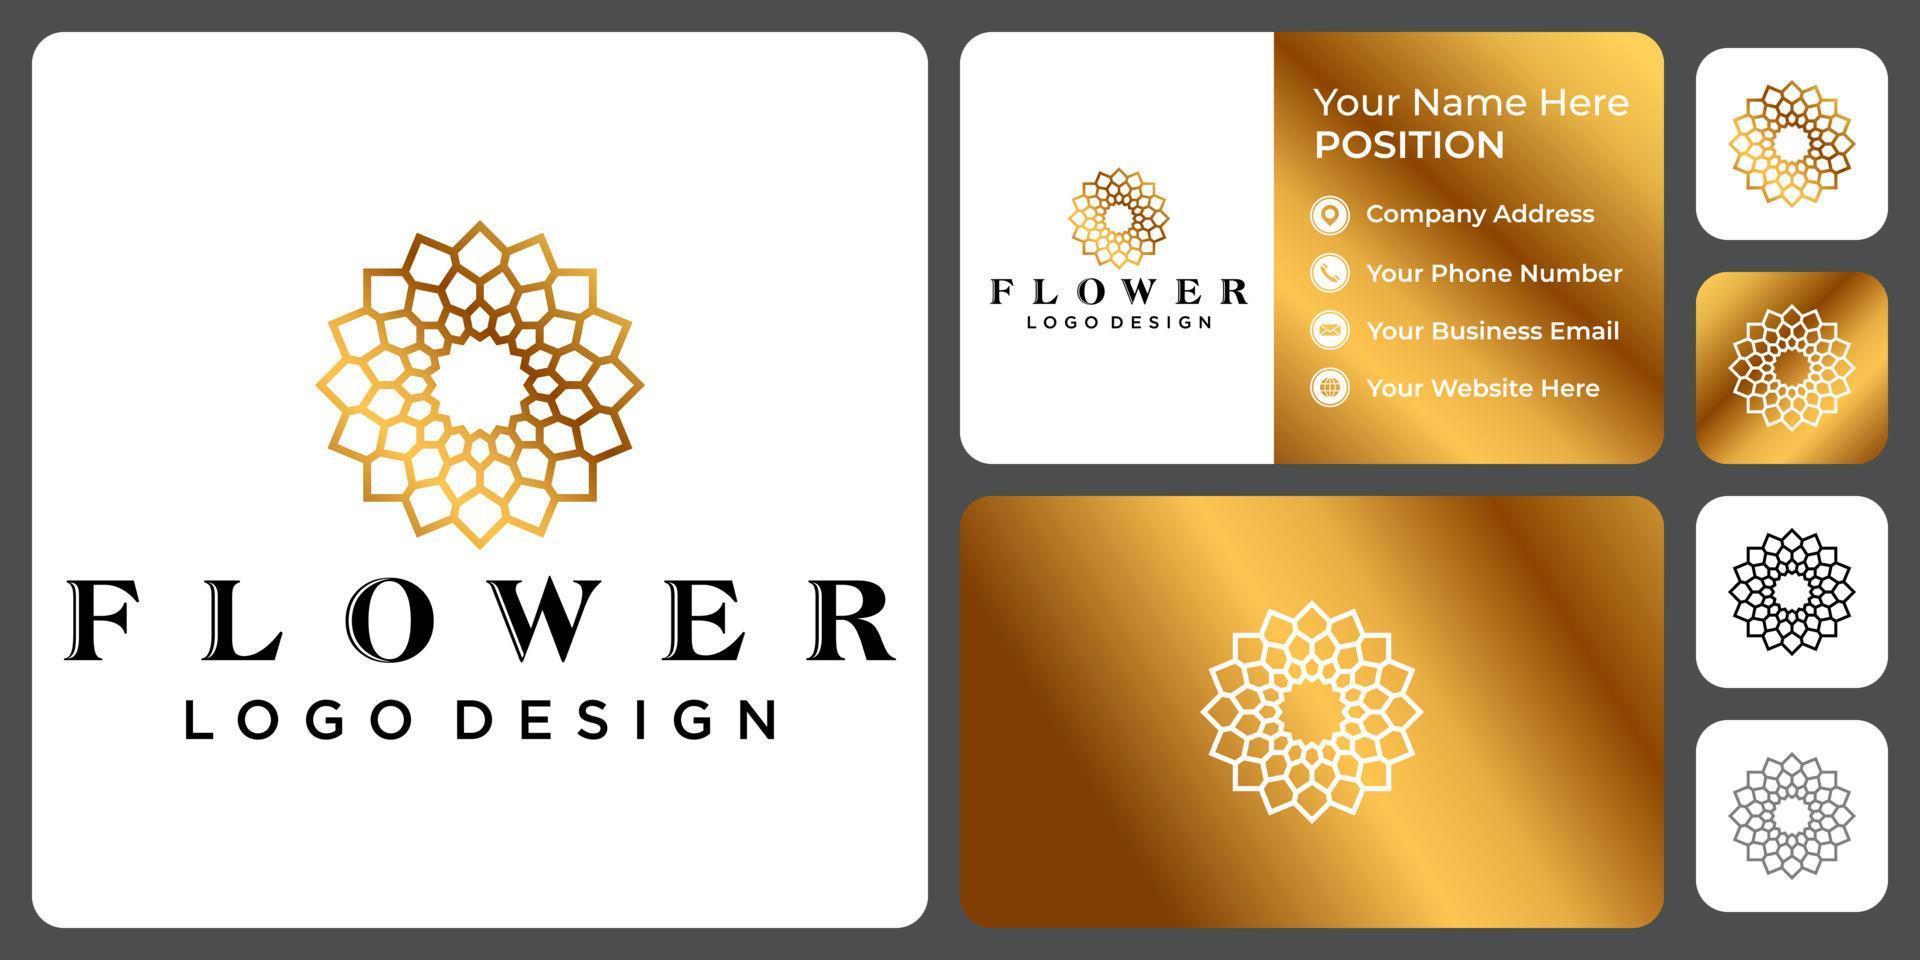 Luxury flower logo design with business card template. vector